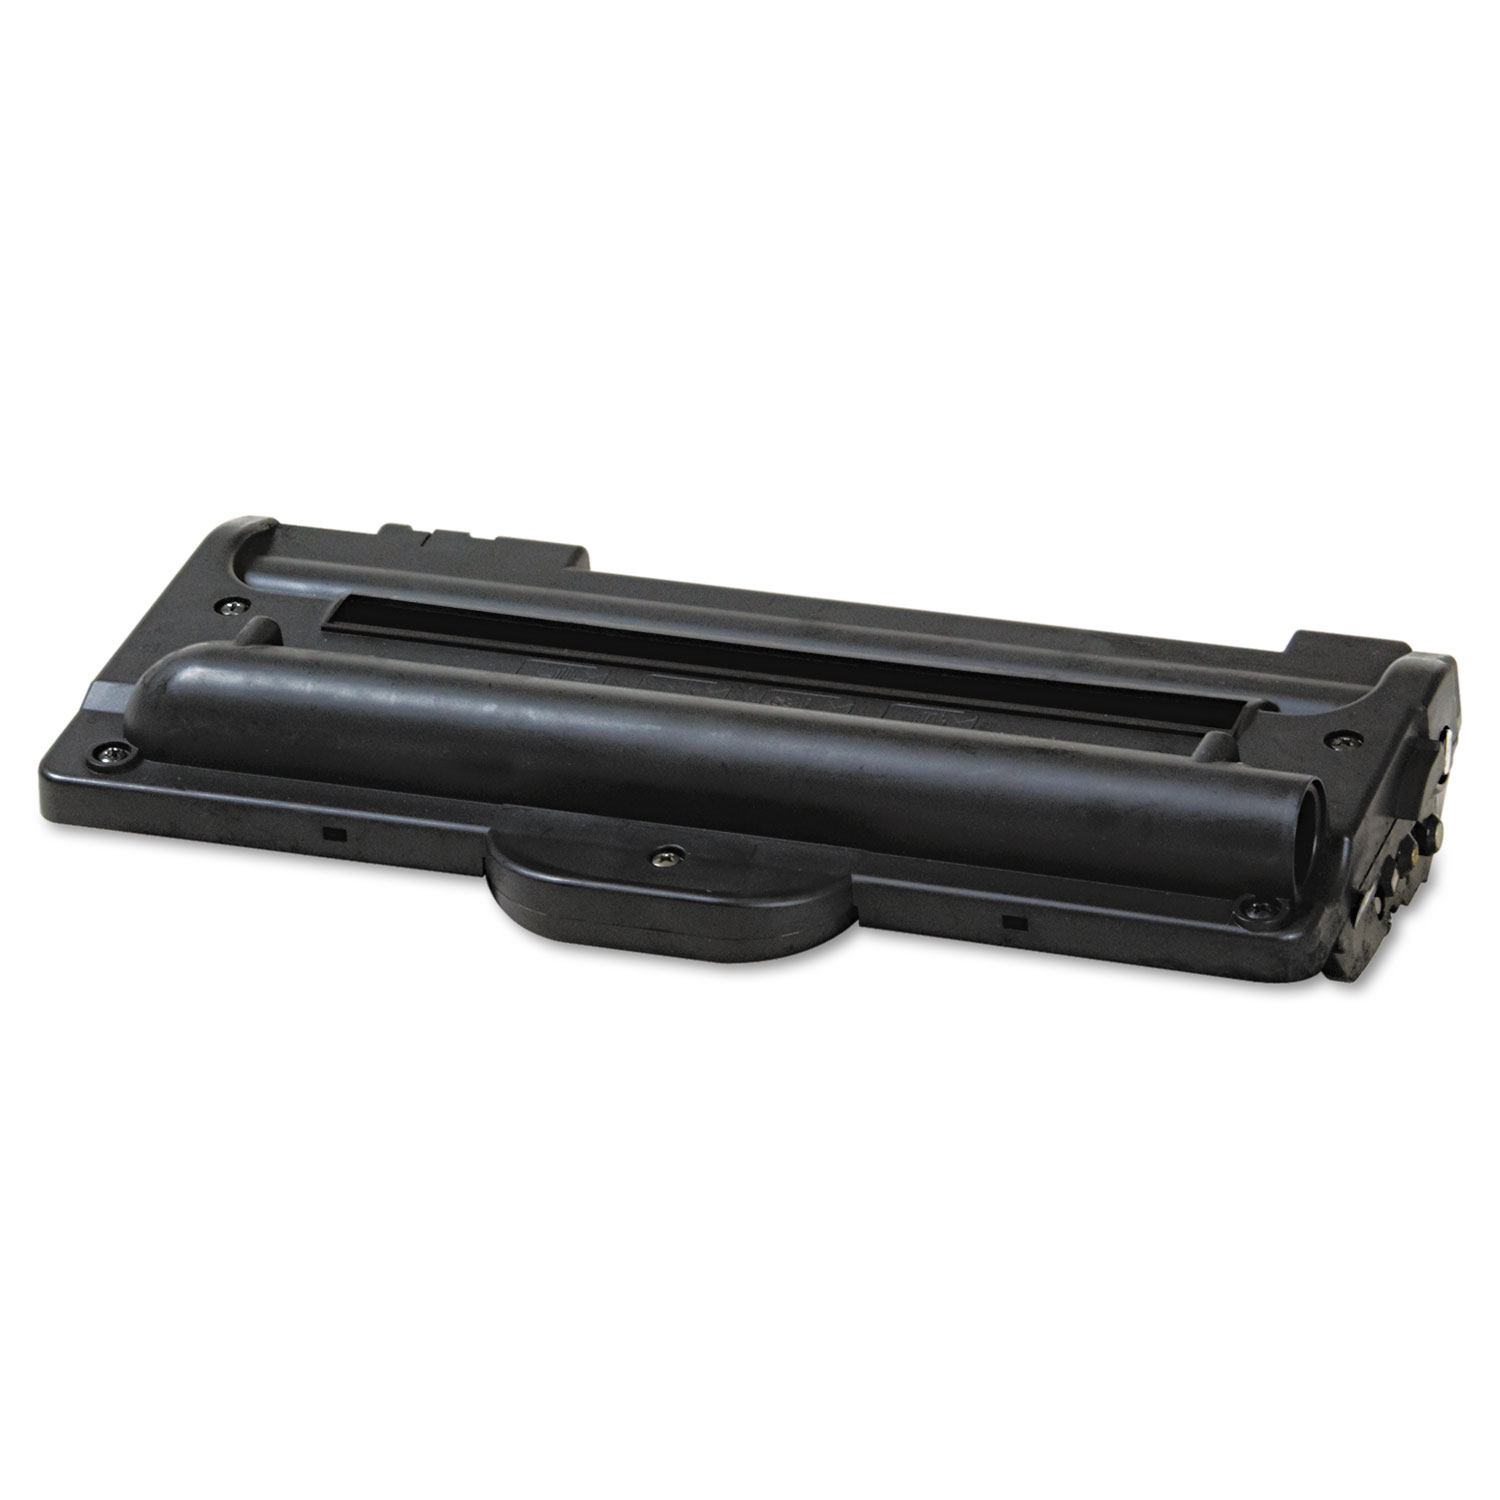  Dataproducts DPC430477 Remanufactured 89839 (AC104) Toner, 3500 Page-Yield, Black (DPSDPC430477) 